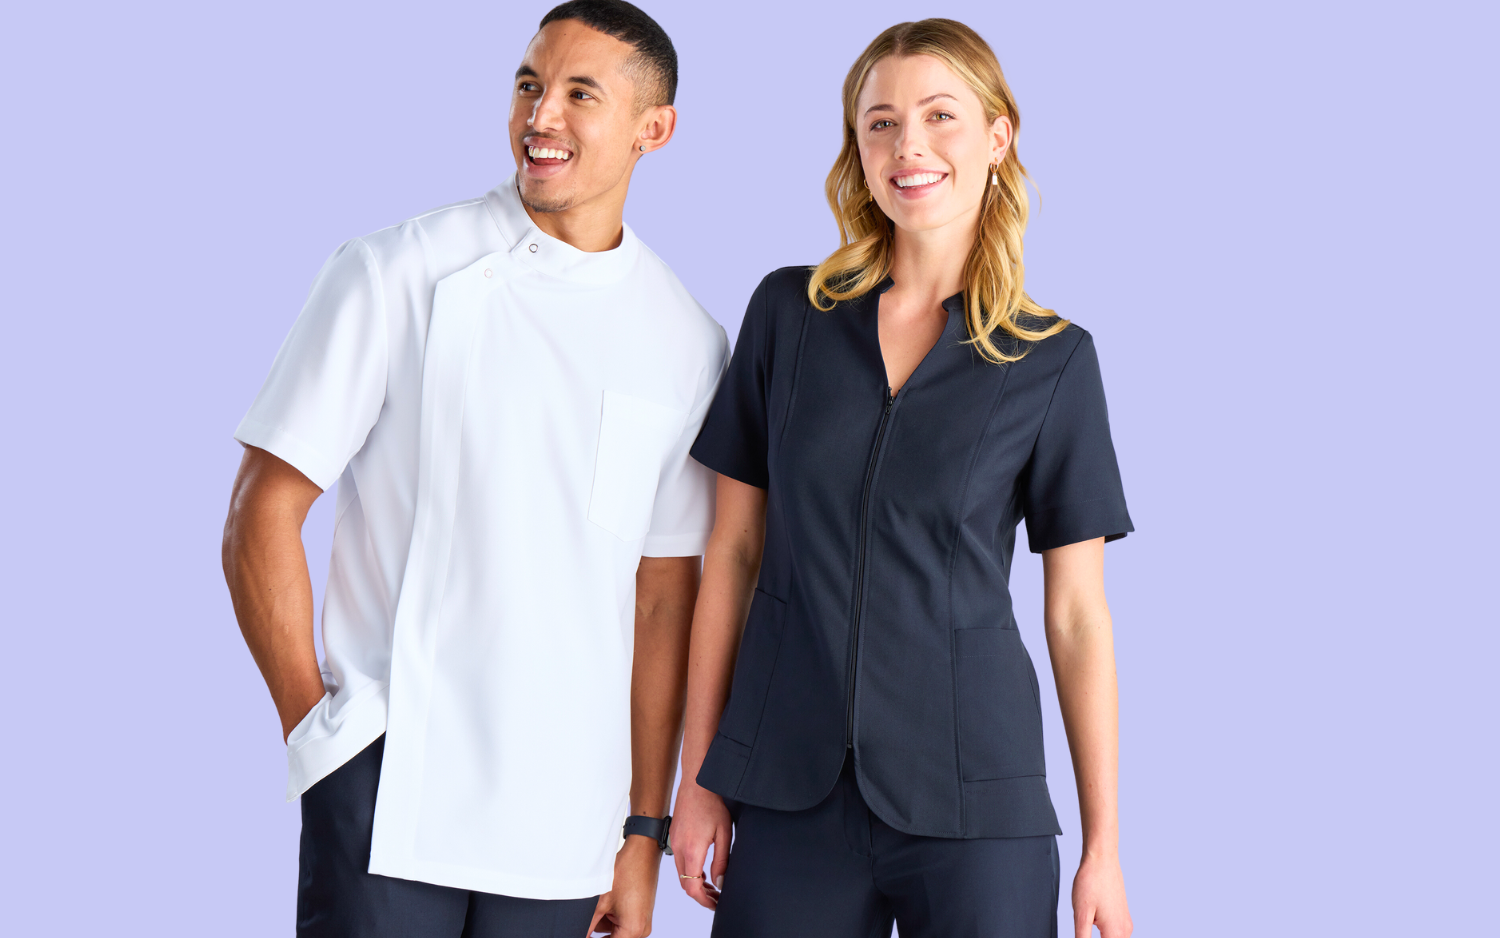 Pharmacy Uniforms Australia: A smiling young woman and man posing together. The man is wearing a classic pharmacy jacket, and the woman is wearing a french navy zip front tunic.